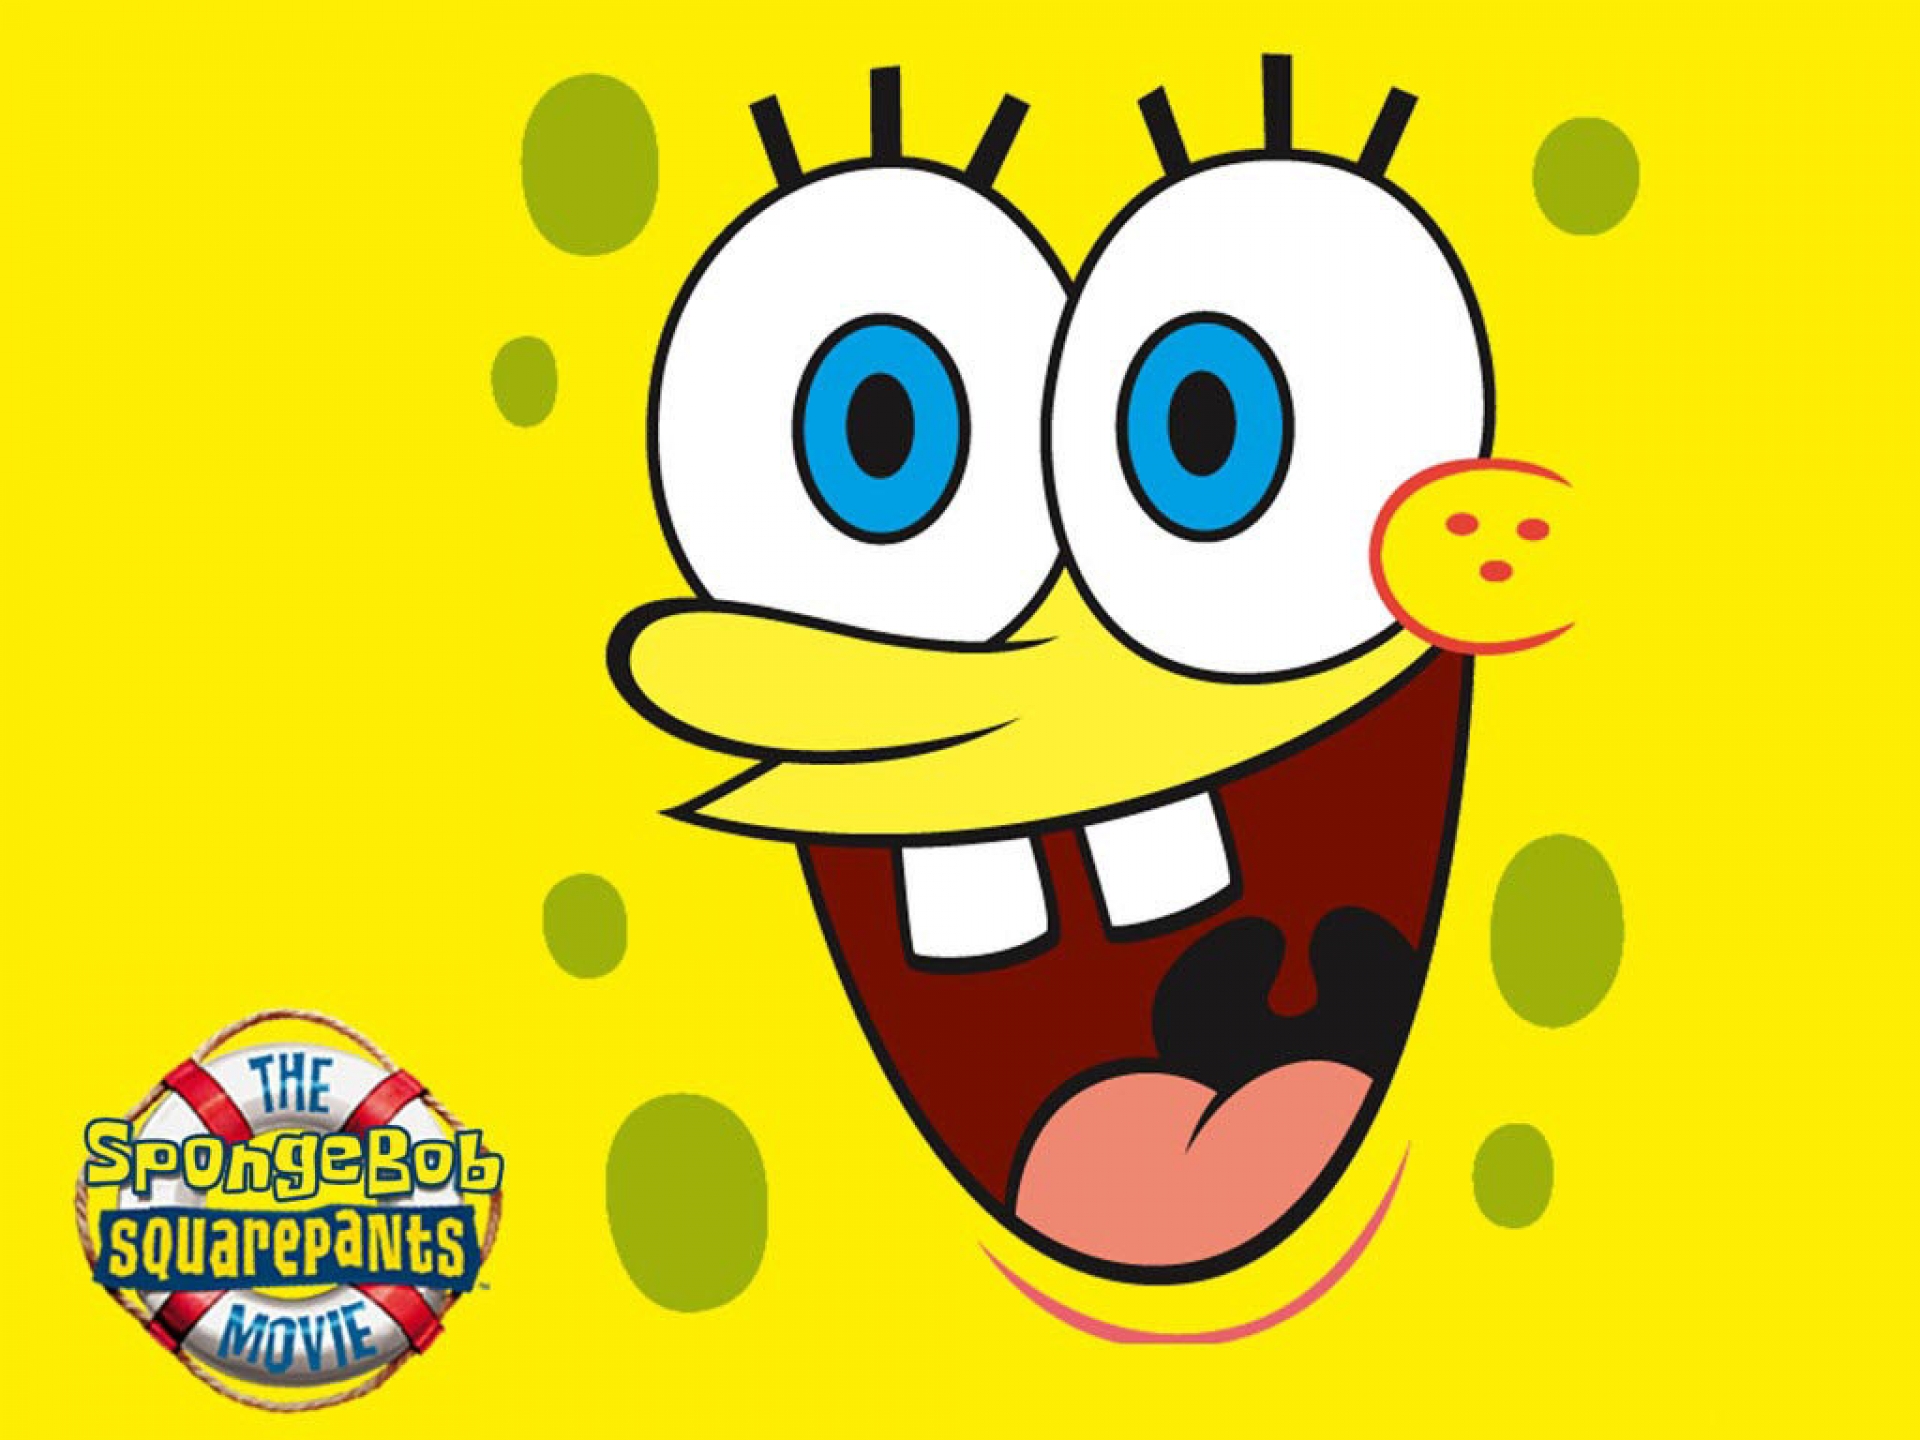 Funny Cartoon Faces Images | Free Download Clip Art | Free Clip ...